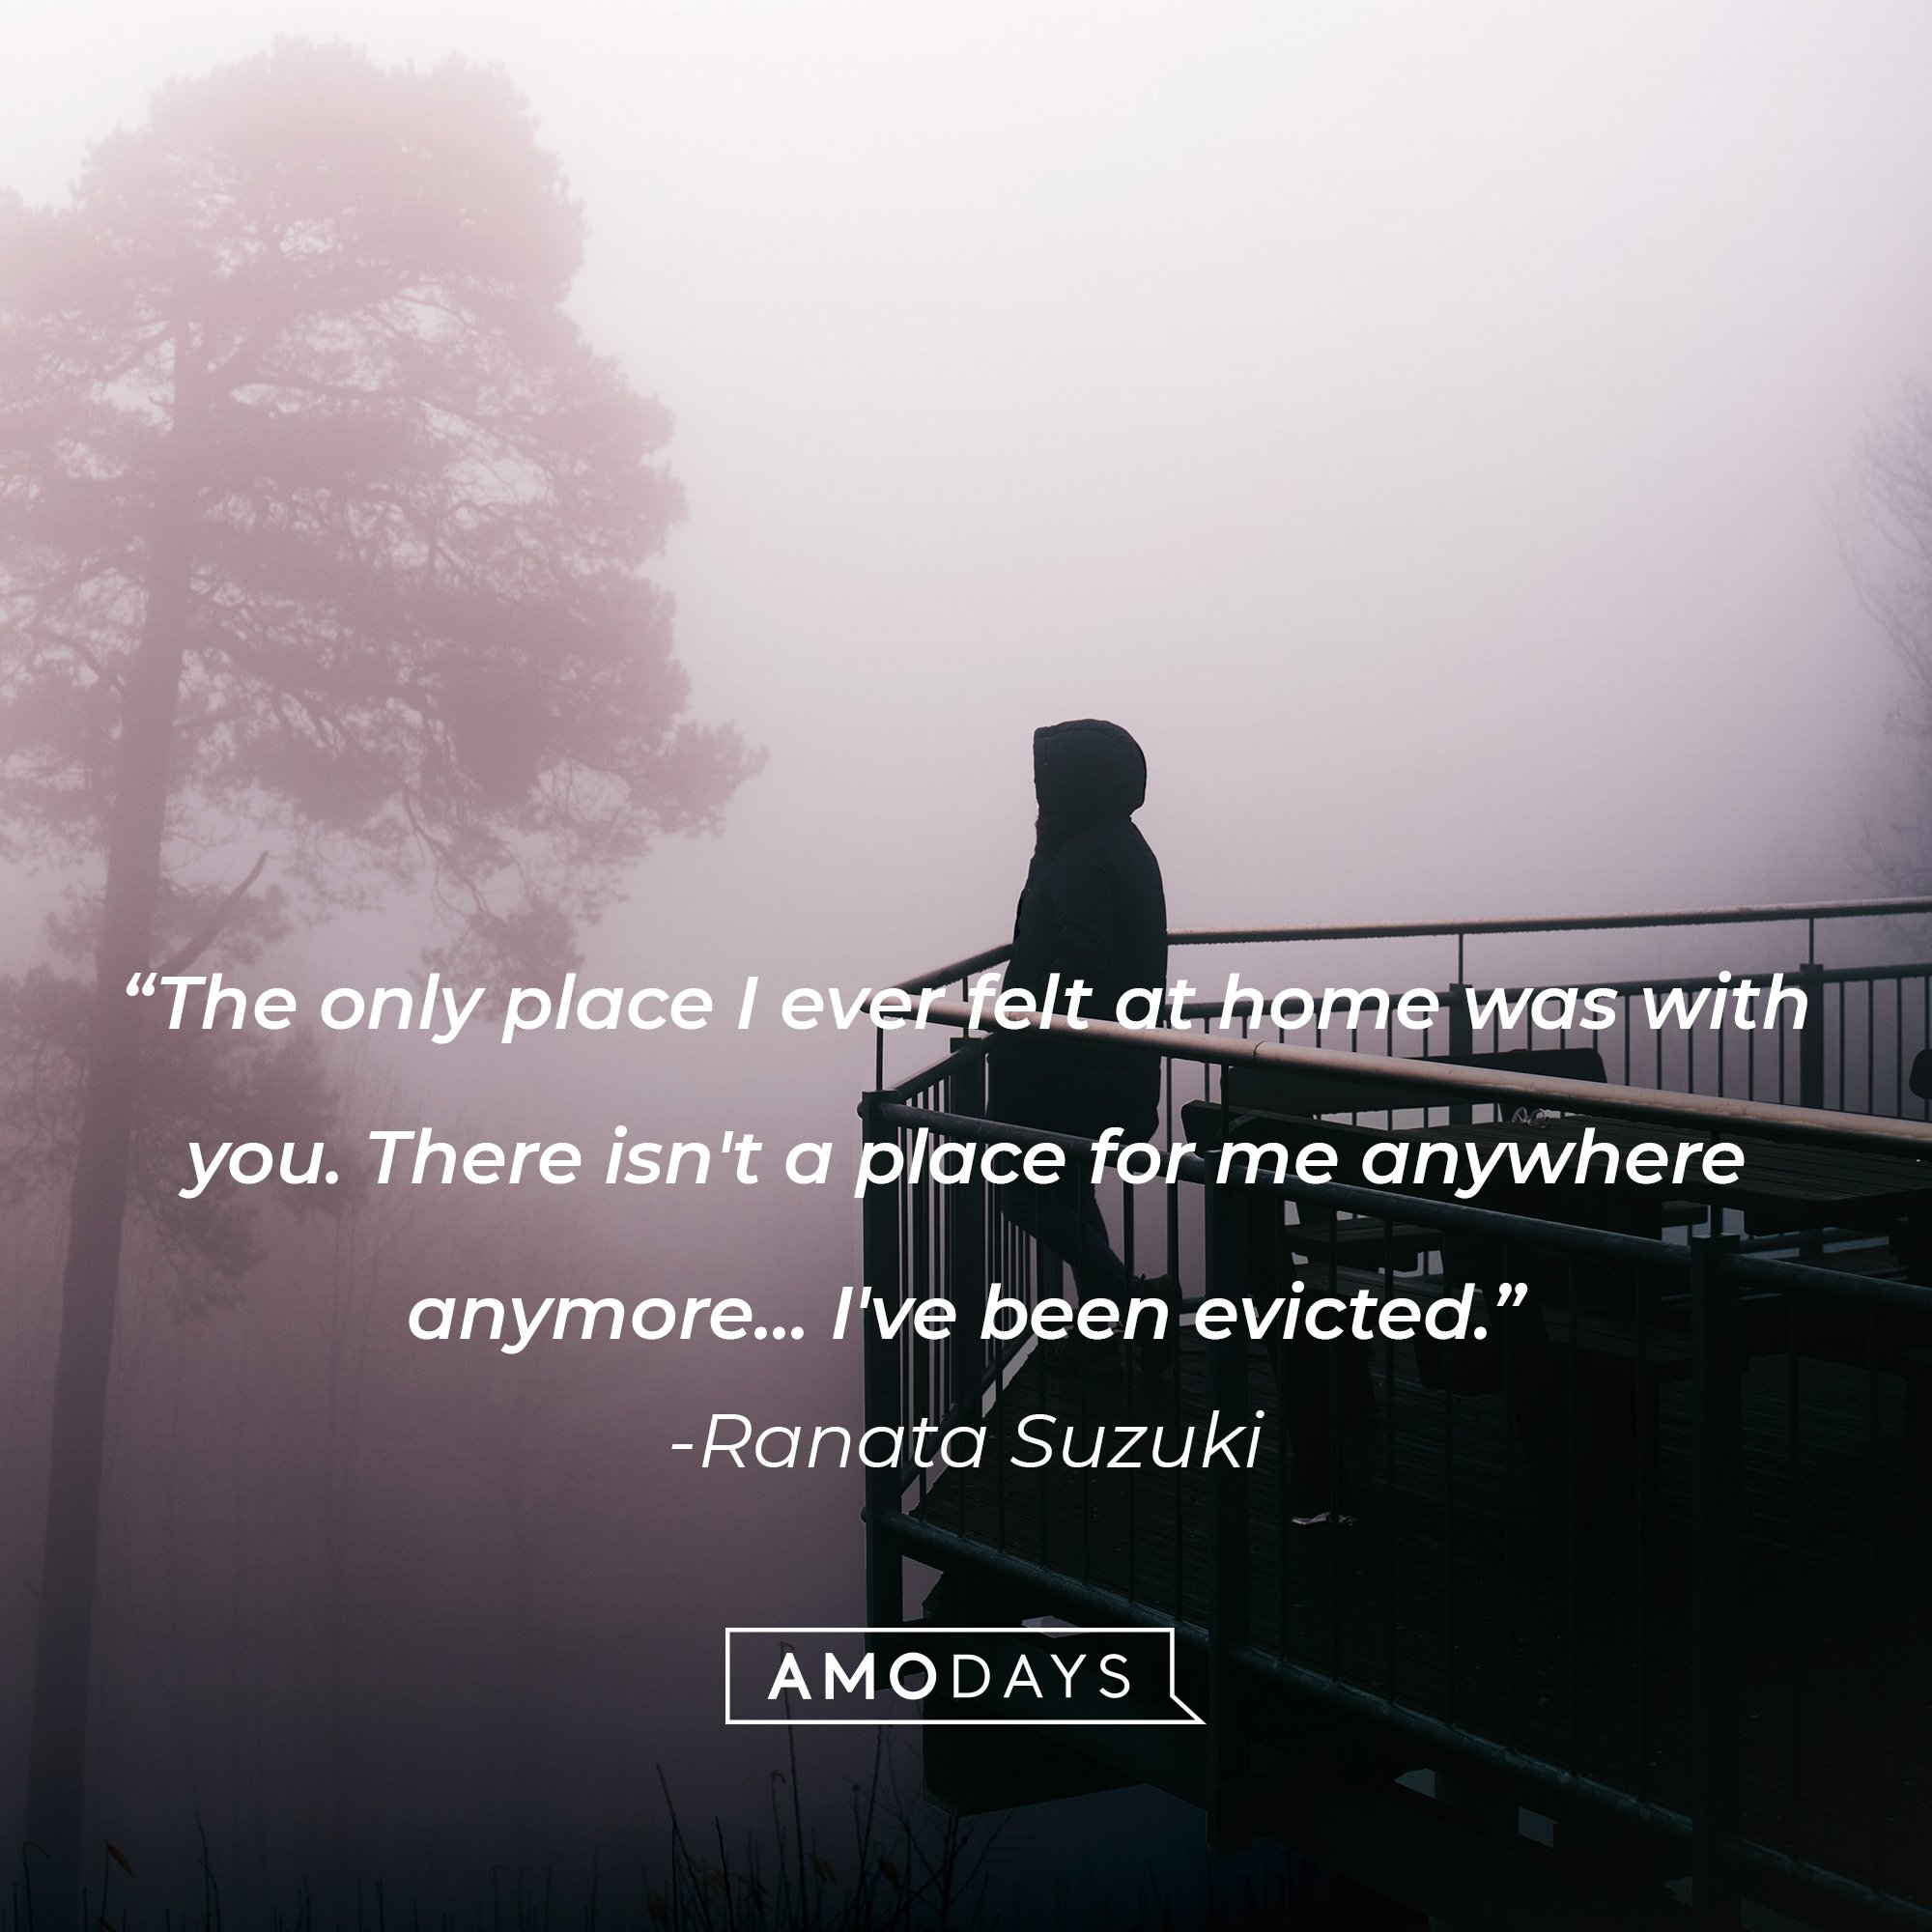 Ranata Suzuki’s quote: "The only place I ever felt at home was with you. There isn't a place for me anywhere anymore... I've been evicted." | Image: AmoDays